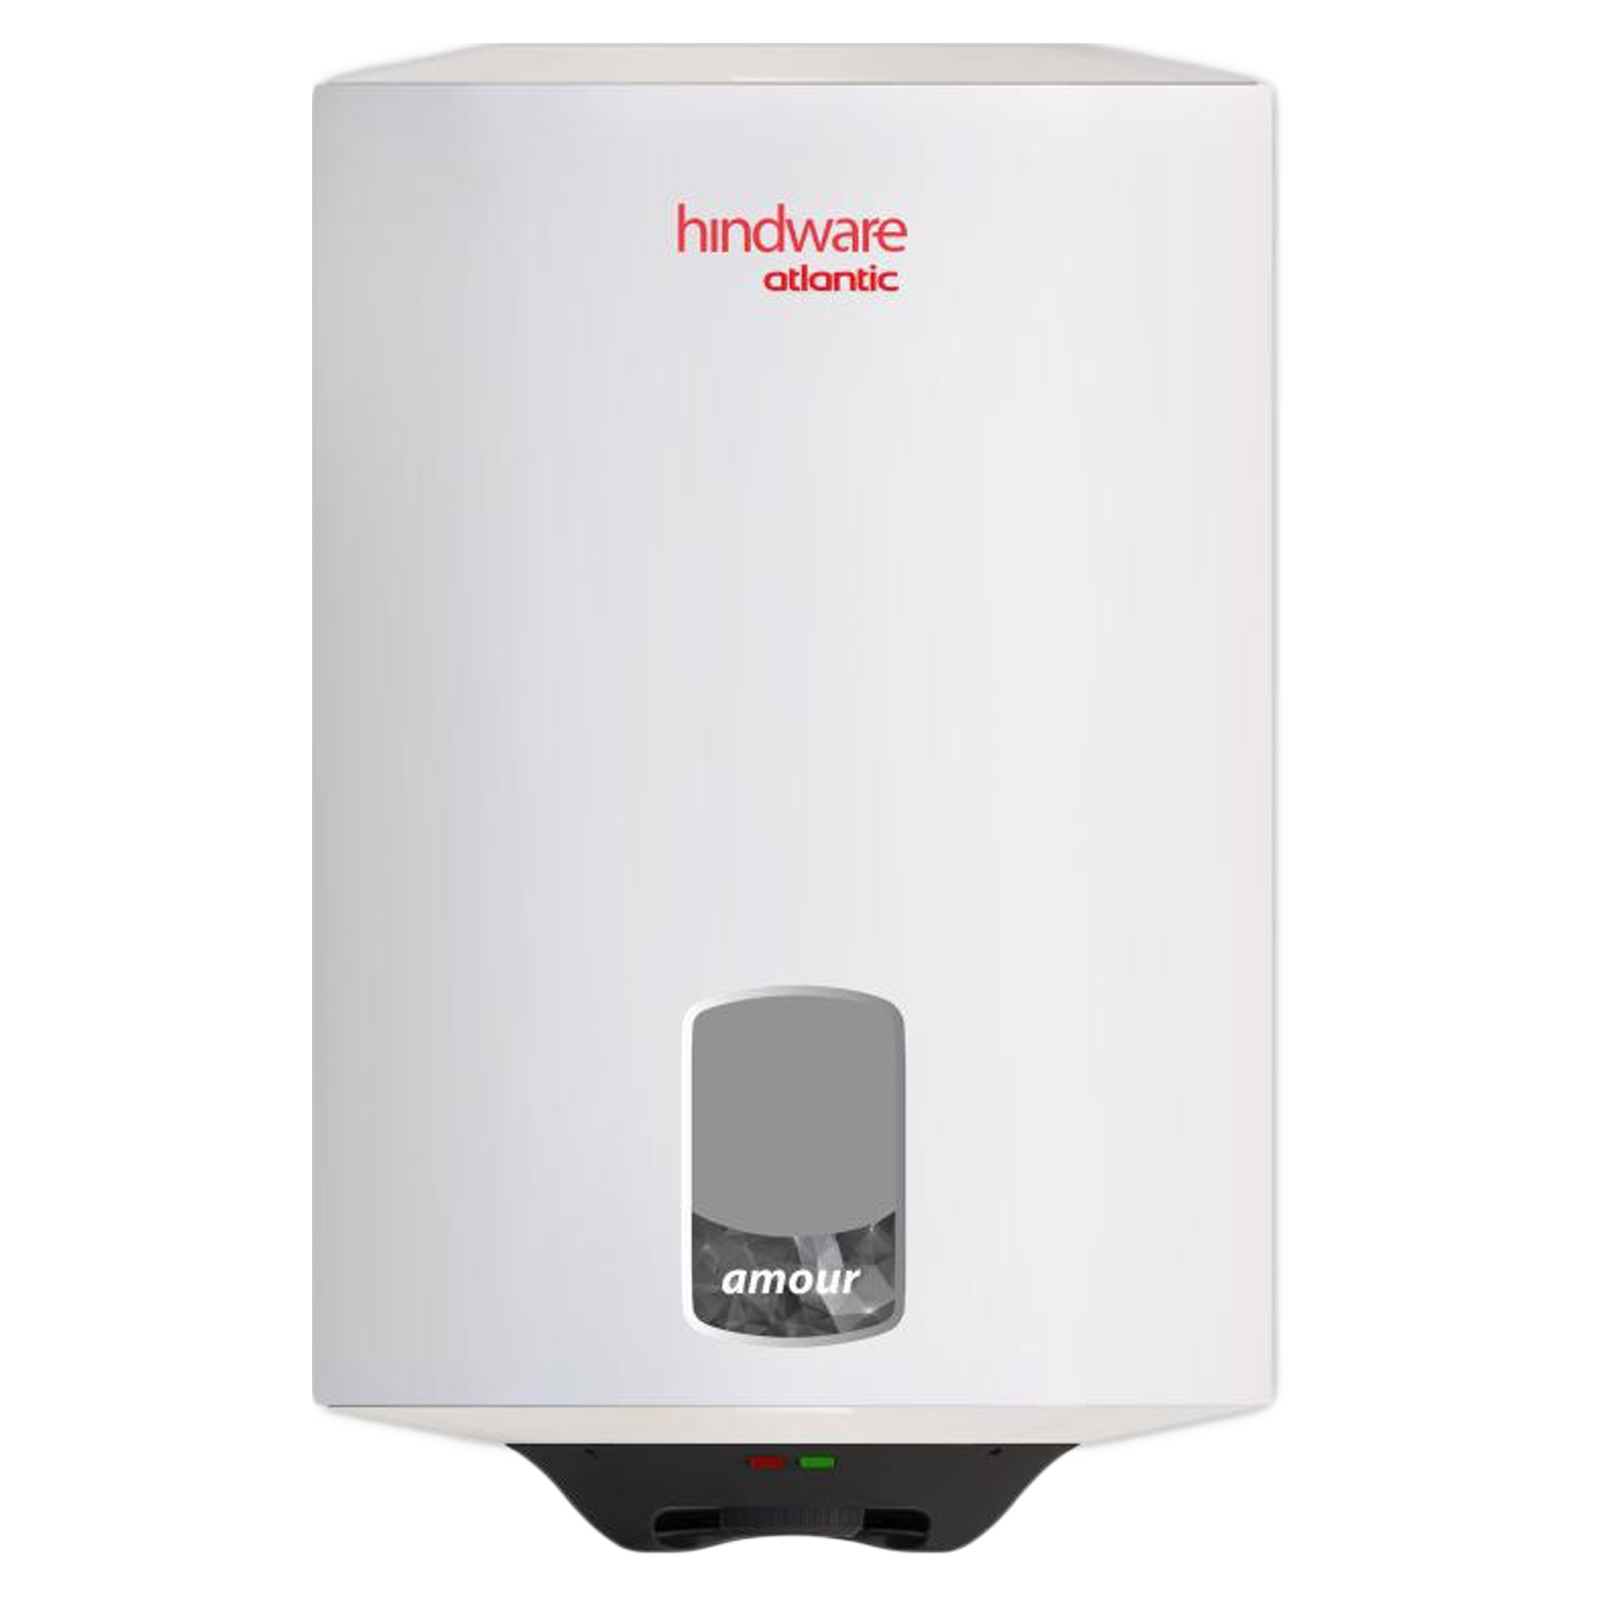 hindware Atlantic Amour 10 Litres 4 Star Storage Water Heater (2000 Watts, 519910, White)